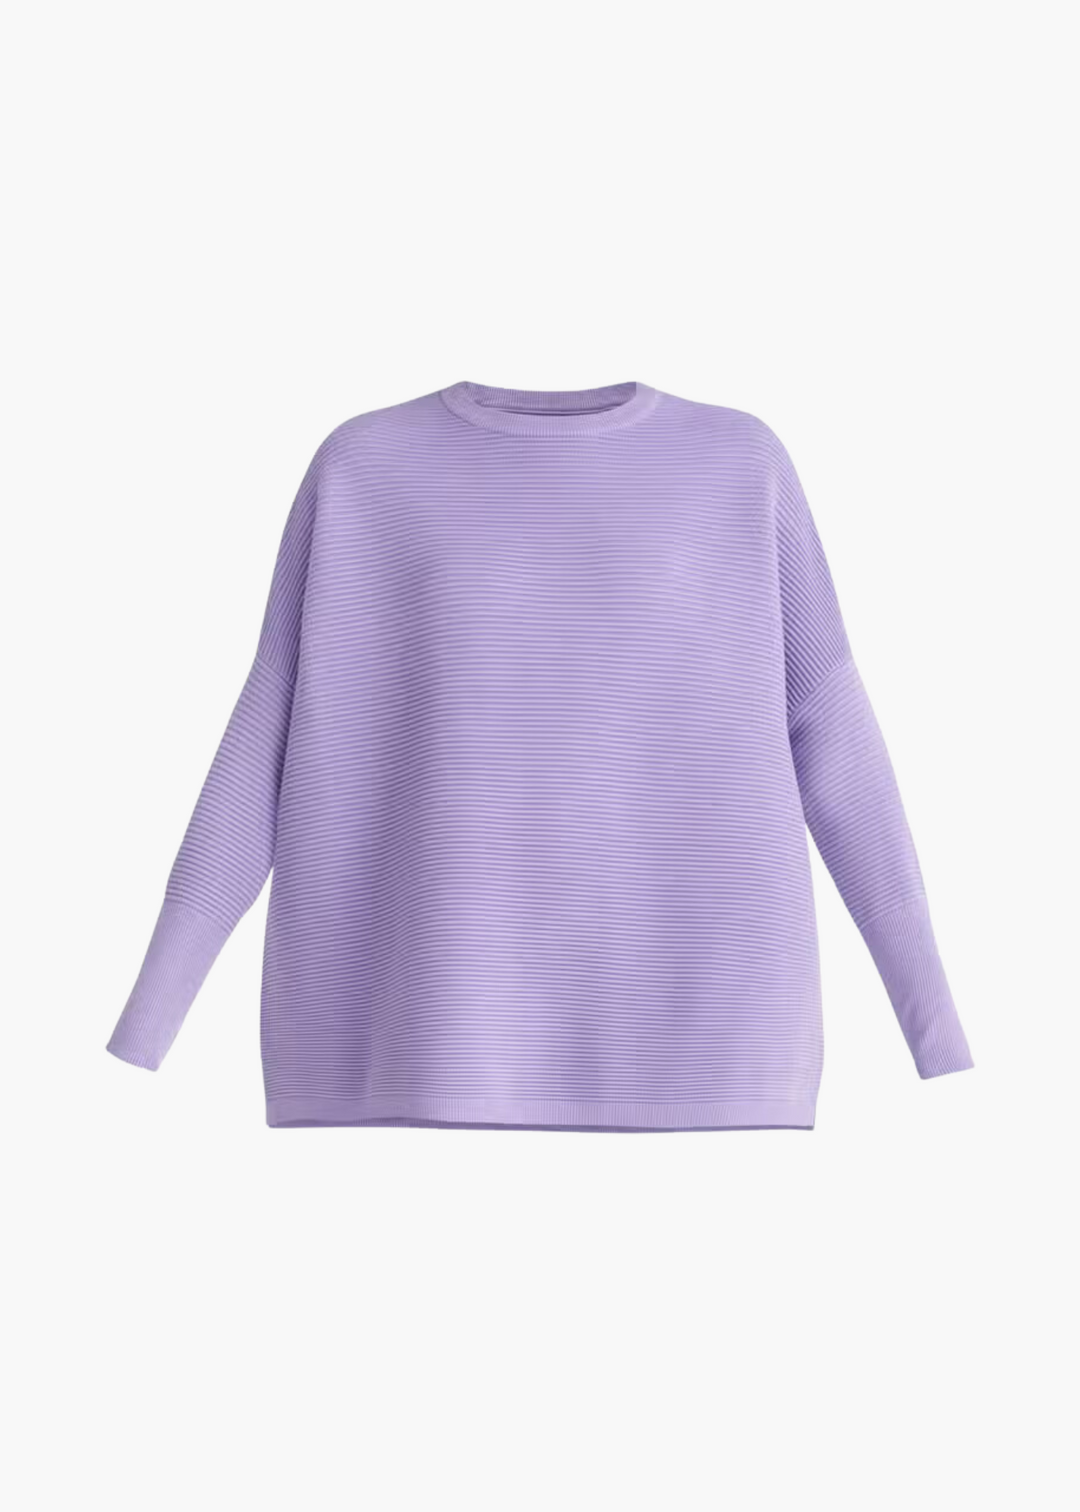 Poppy Ribbed Crewneck Pullover in Lilac